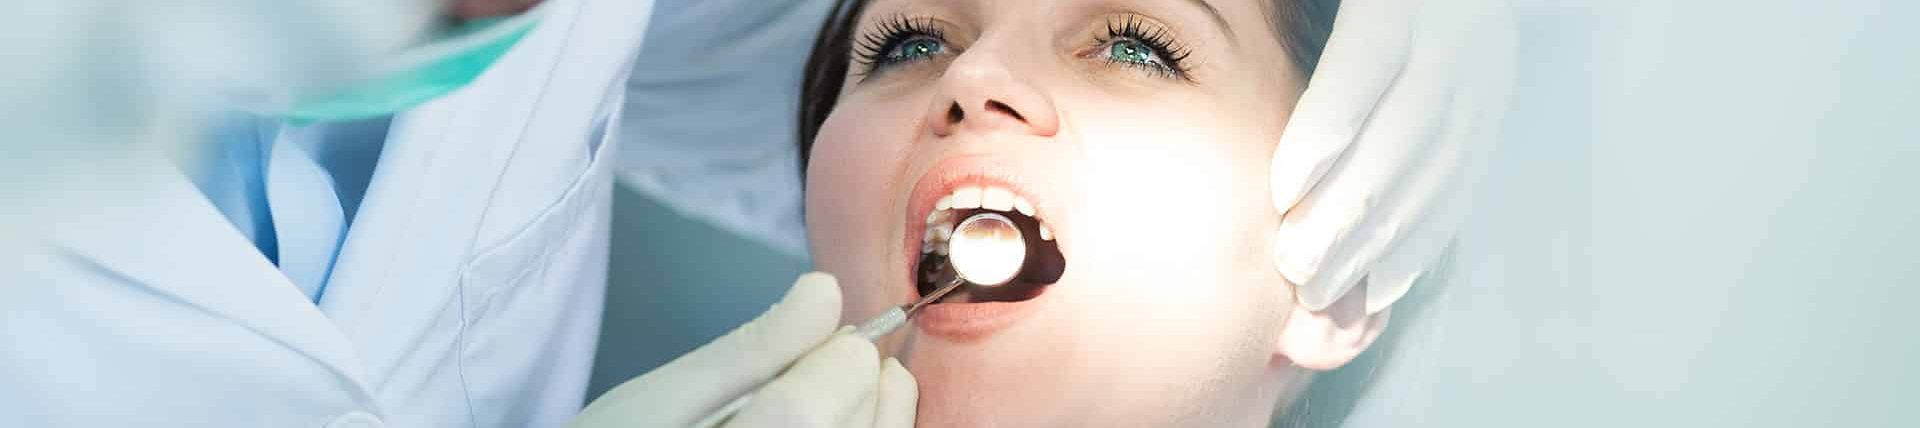 Teeth Cleanings - Banner - Family Dental Care